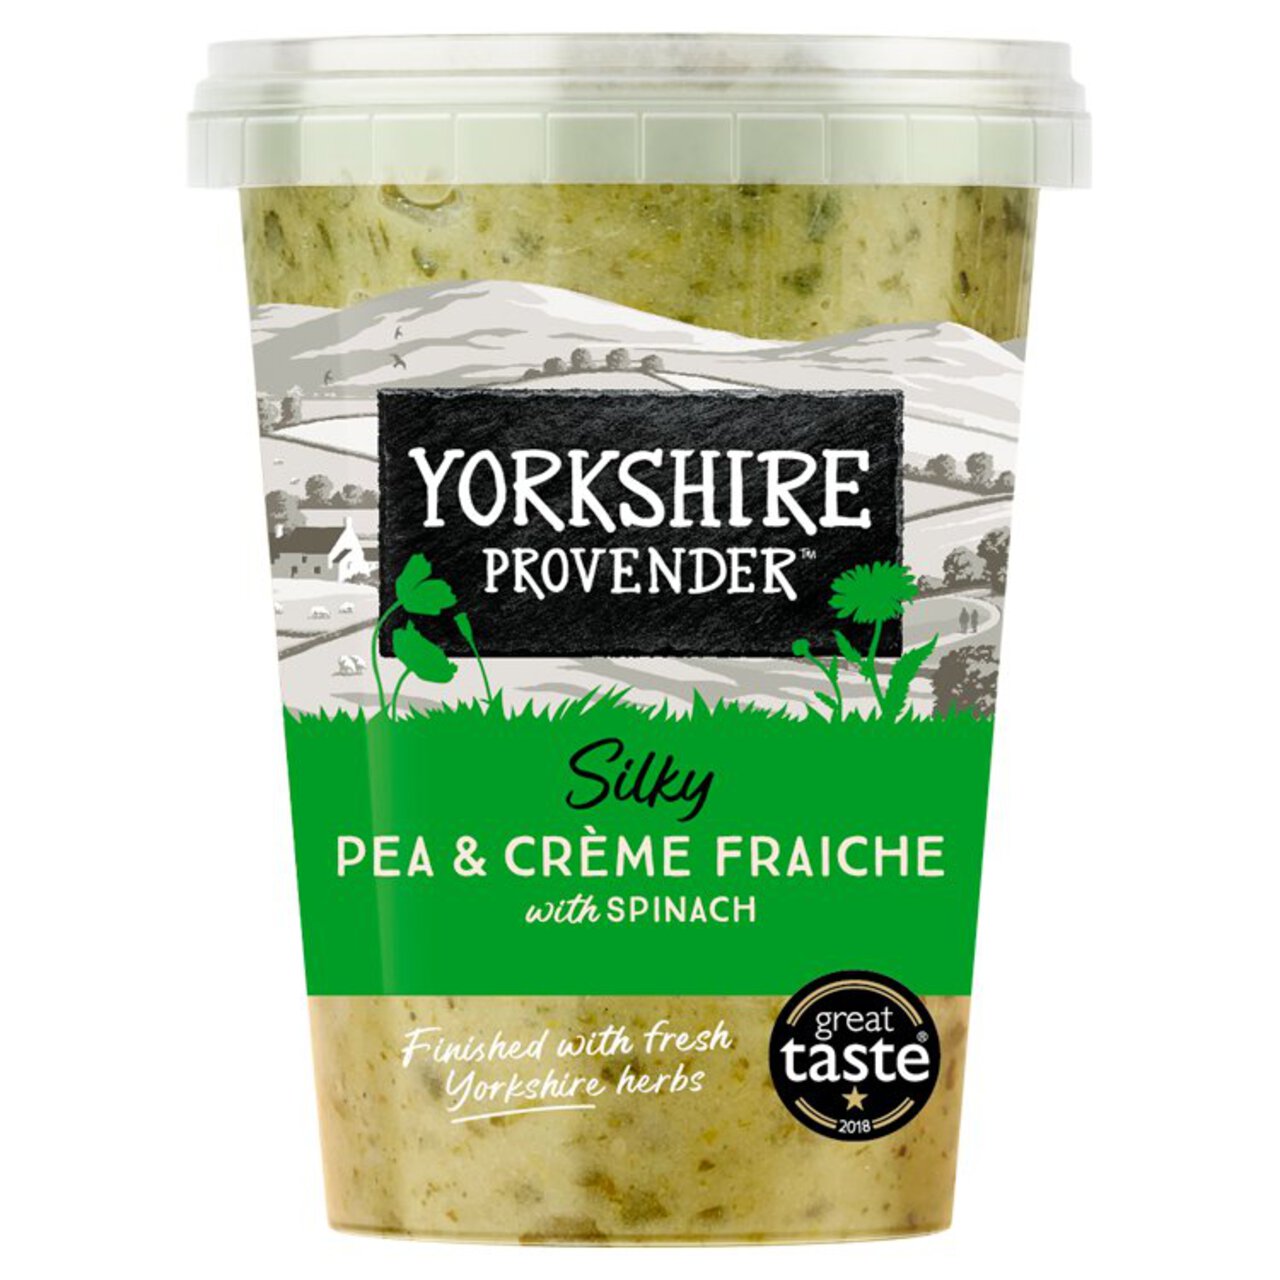 Yorkshire Provender Pea & Creme Fraiche With Spinach 600g